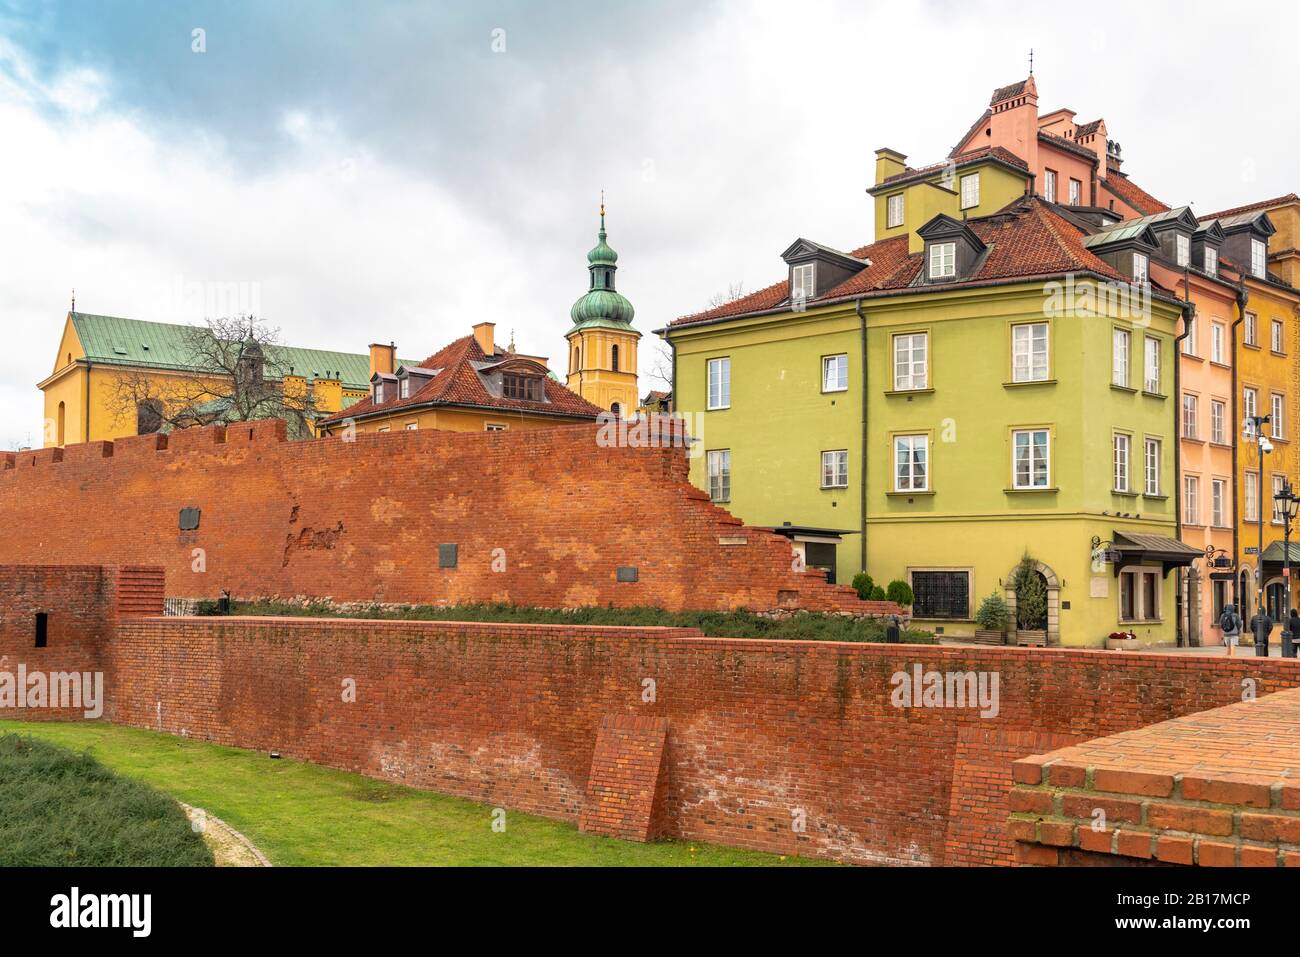 Remains of historic defence wall from the fortification of the old town, Stare Miasto, Warsaw, Poland Stock Photo